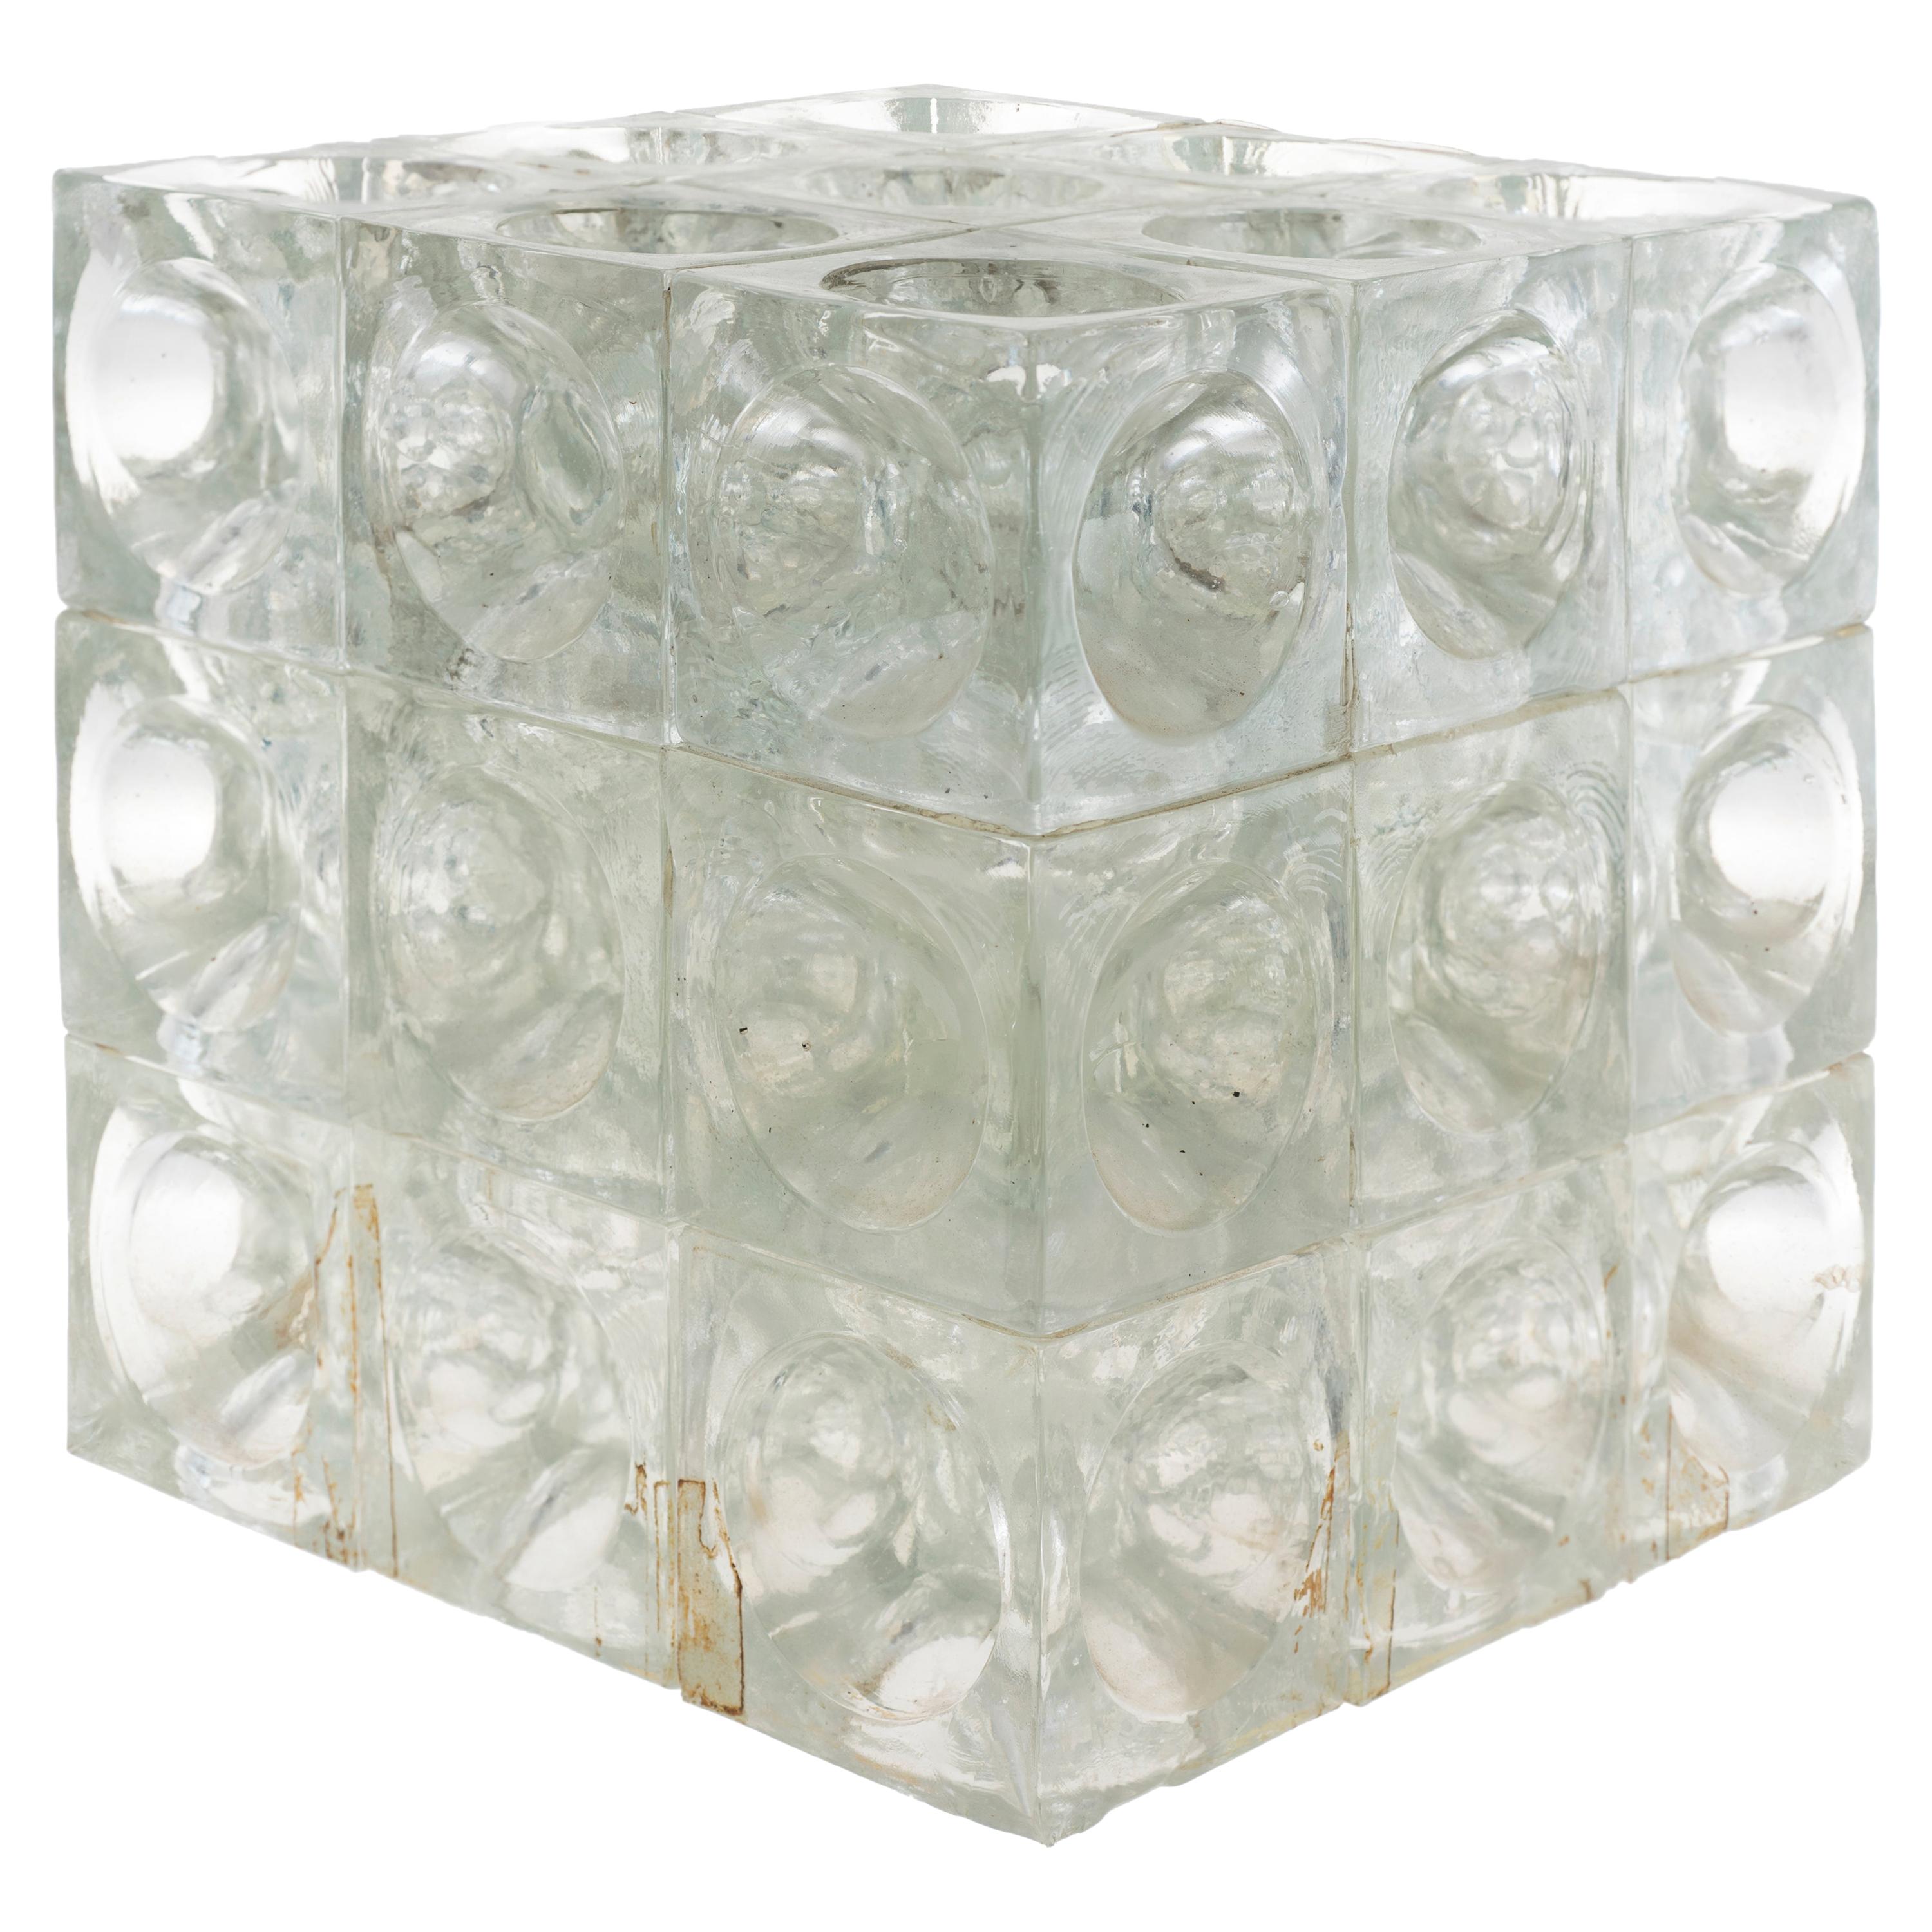 Vintage Poliarte Cube Lamp by Progetto Arte Poli, Italy